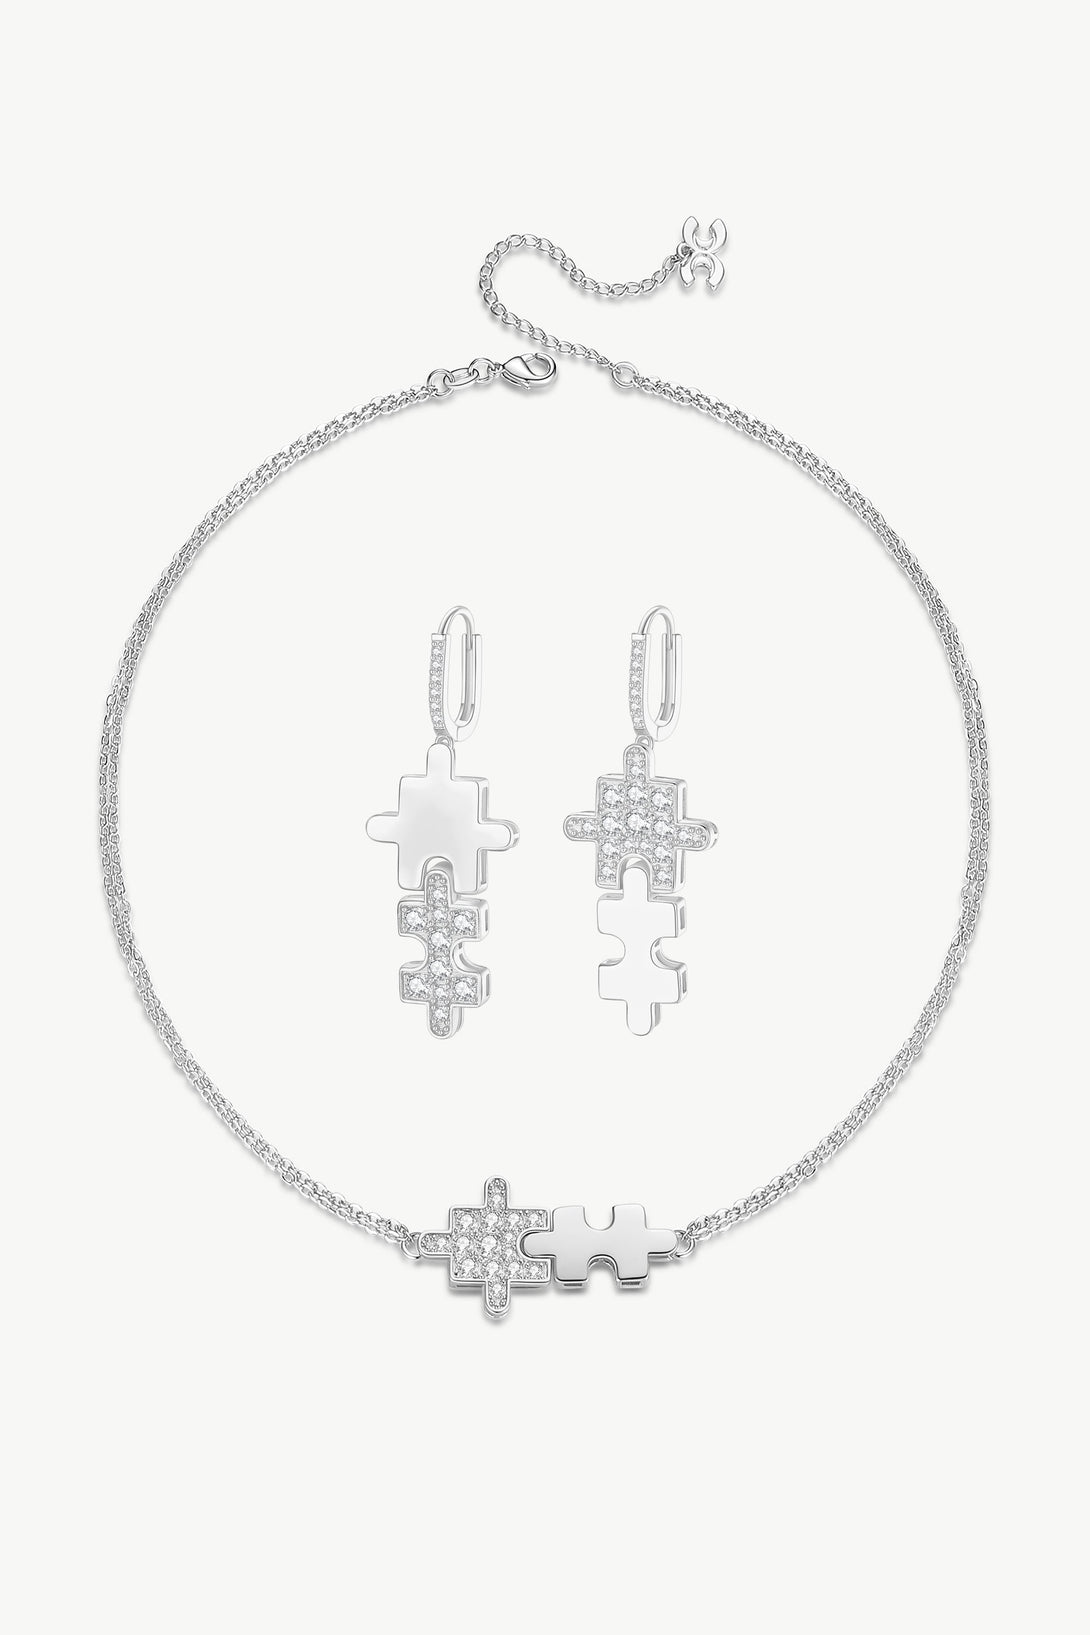 Silver Jigsaw Puzzle Necklace and Earrings Set - Classicharms